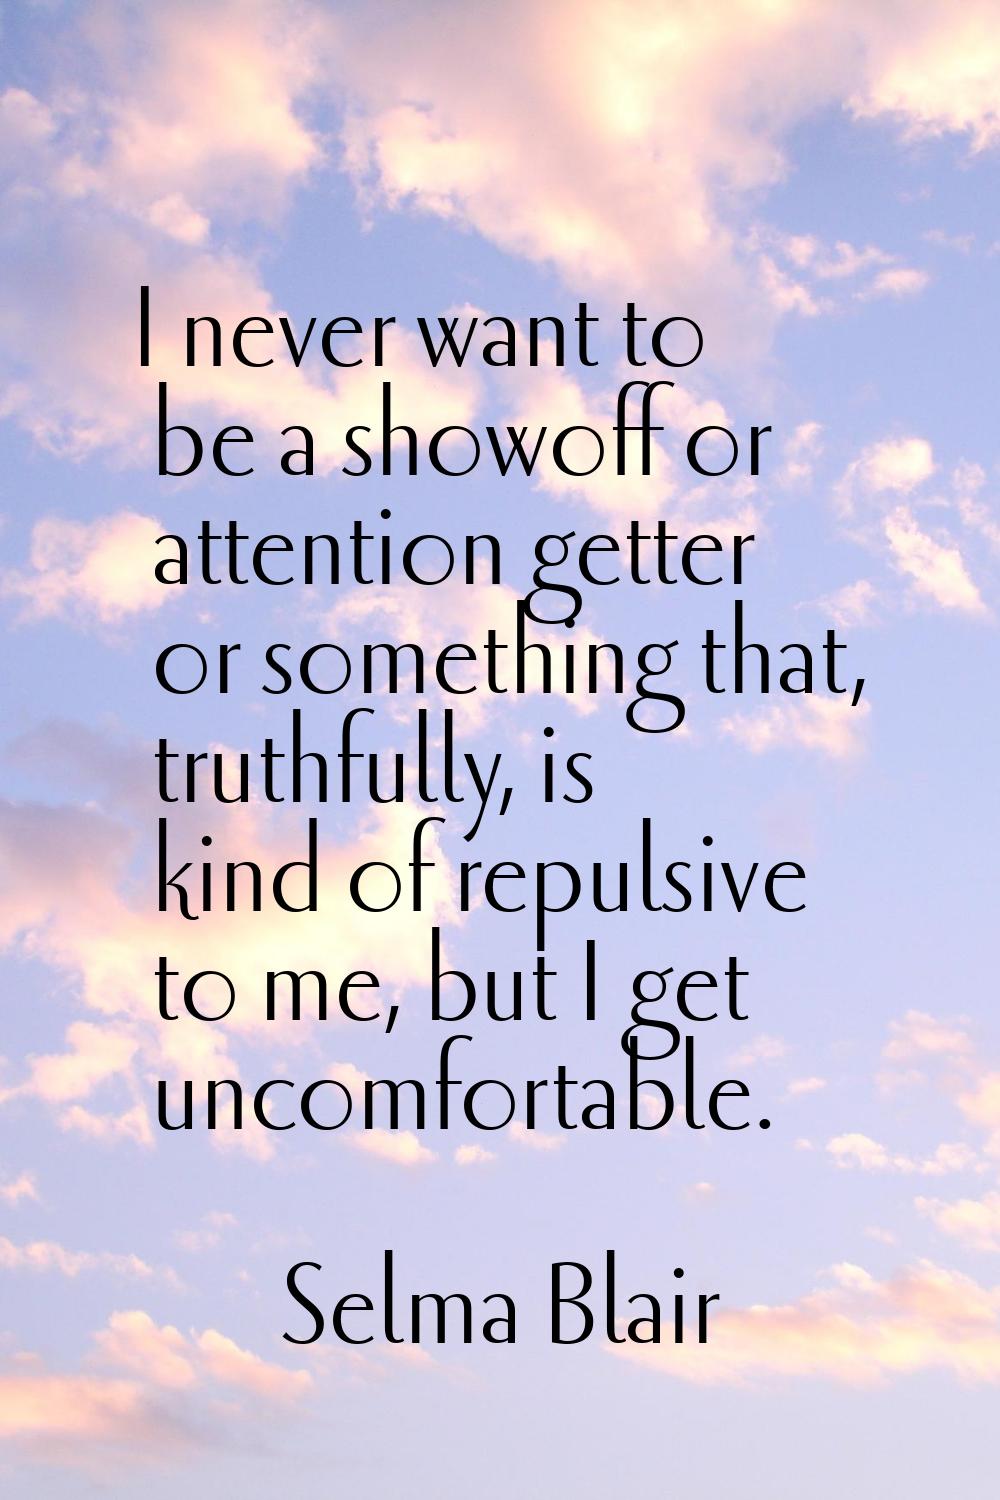 I never want to be a showoff or attention getter or something that, truthfully, is kind of repulsiv